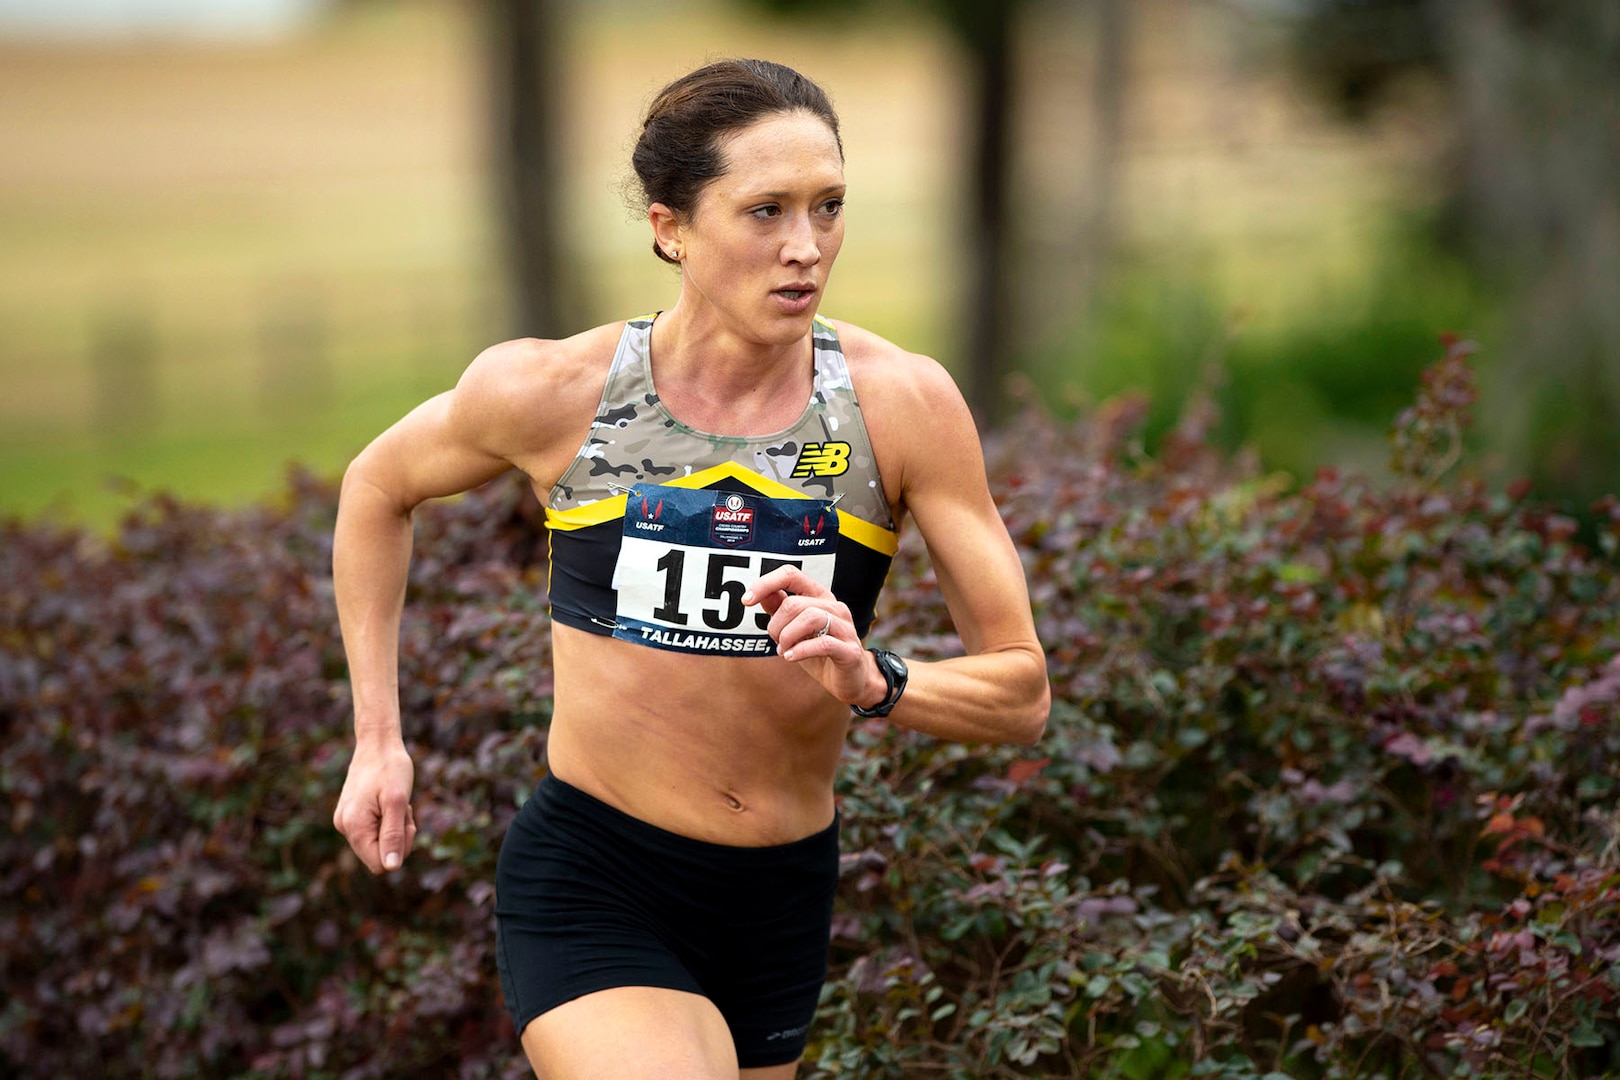 Army Maj. Kelly Calway competes in the 2019 Armed Forces Cross Country Championship and concurrently the 2019 USA Track and Field Cross Country Championship.